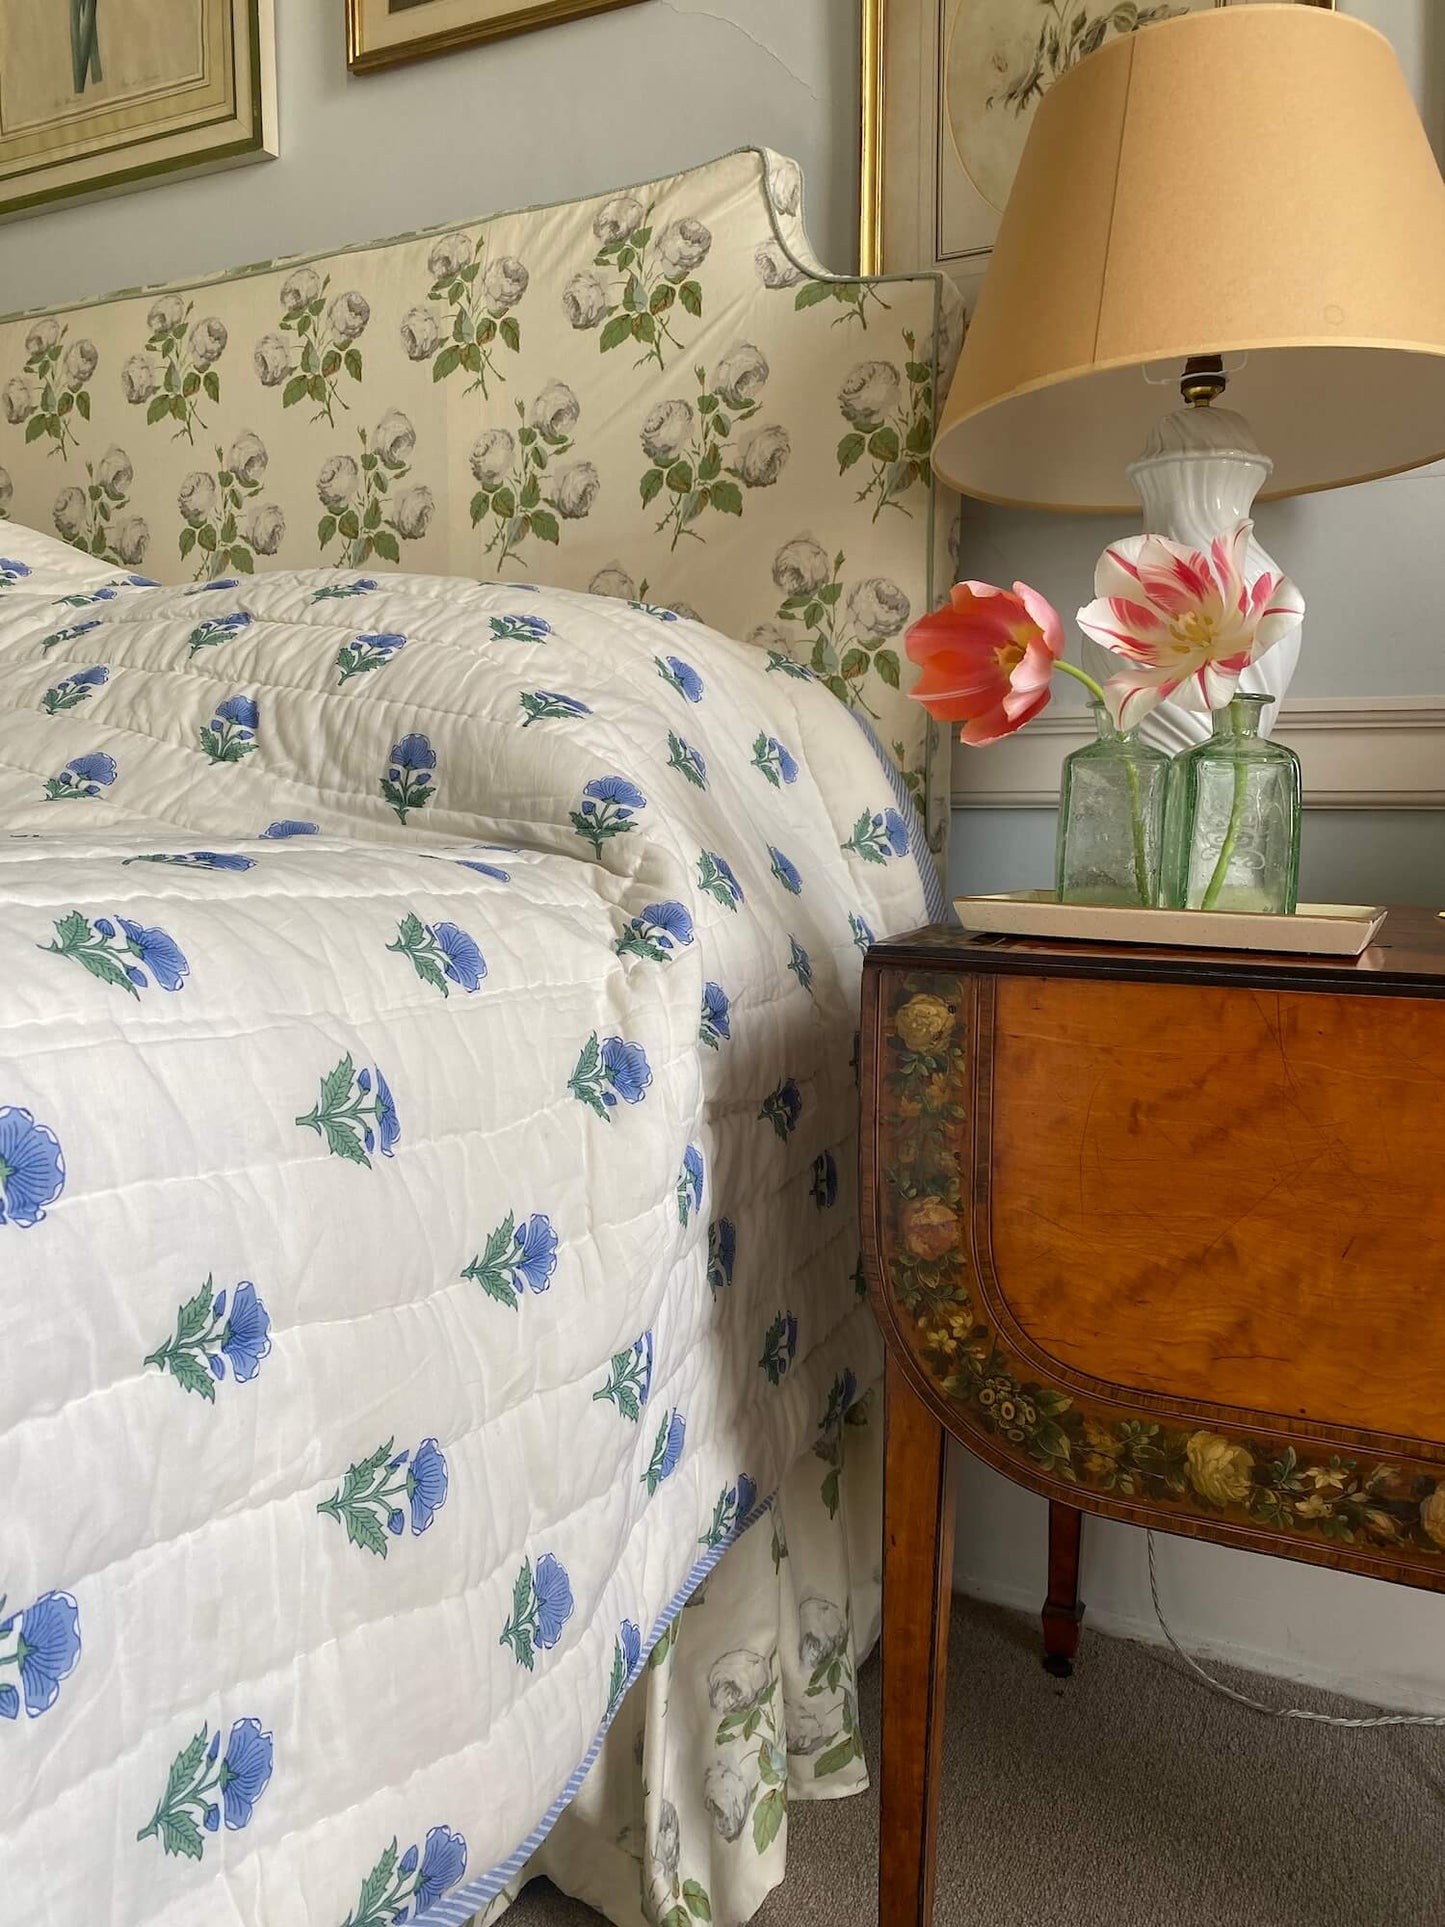 White and blue flower bespoke bed quilts next to antique bedsite table with fresh flowers and lamp